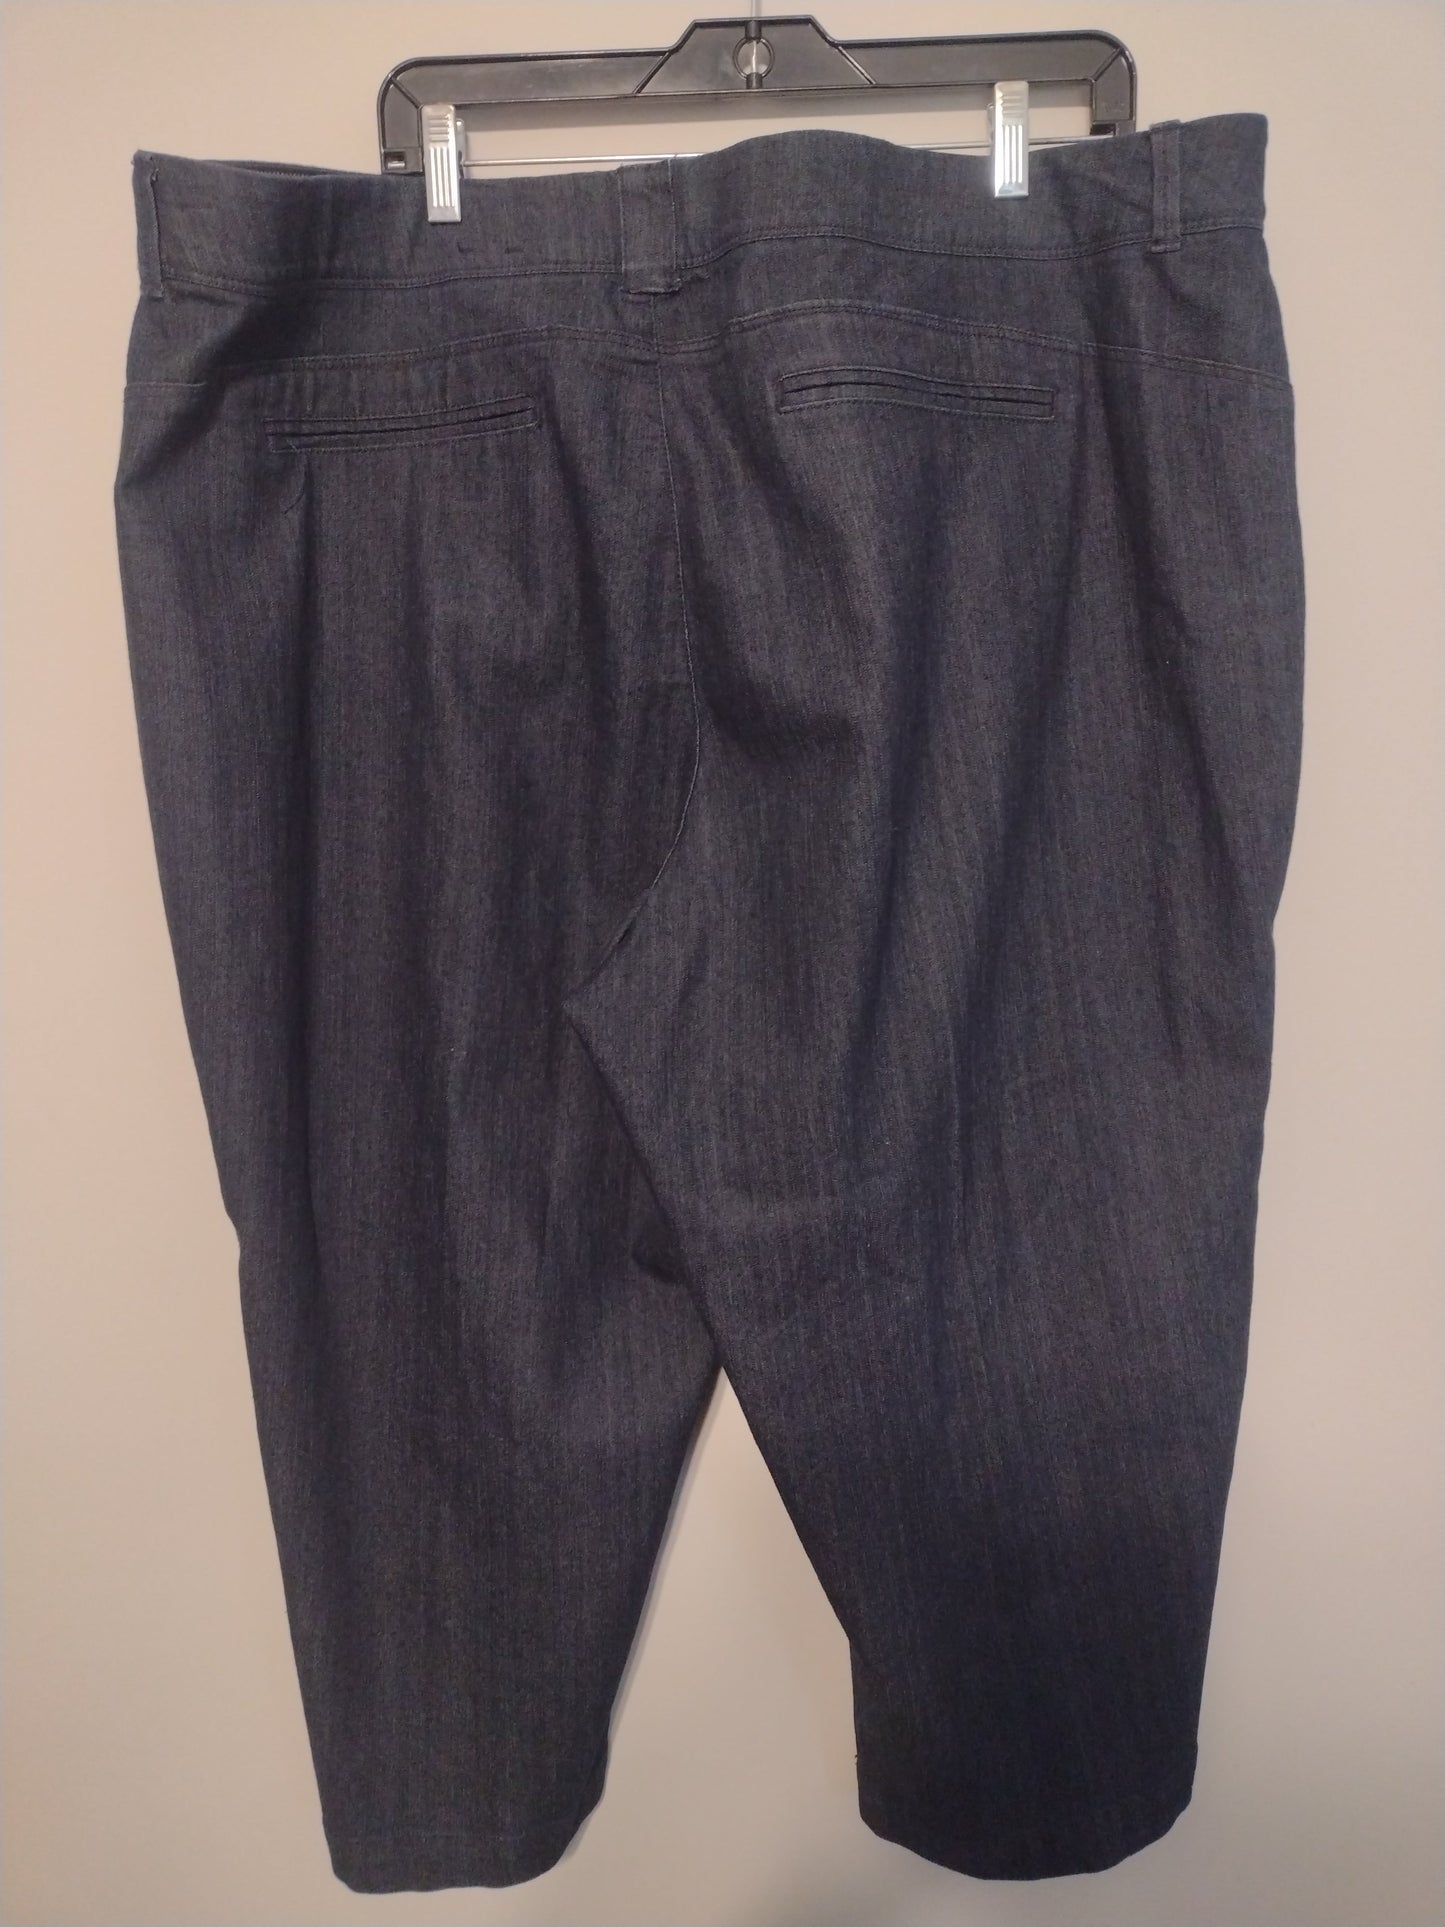 Capris By Intro  Size: 20